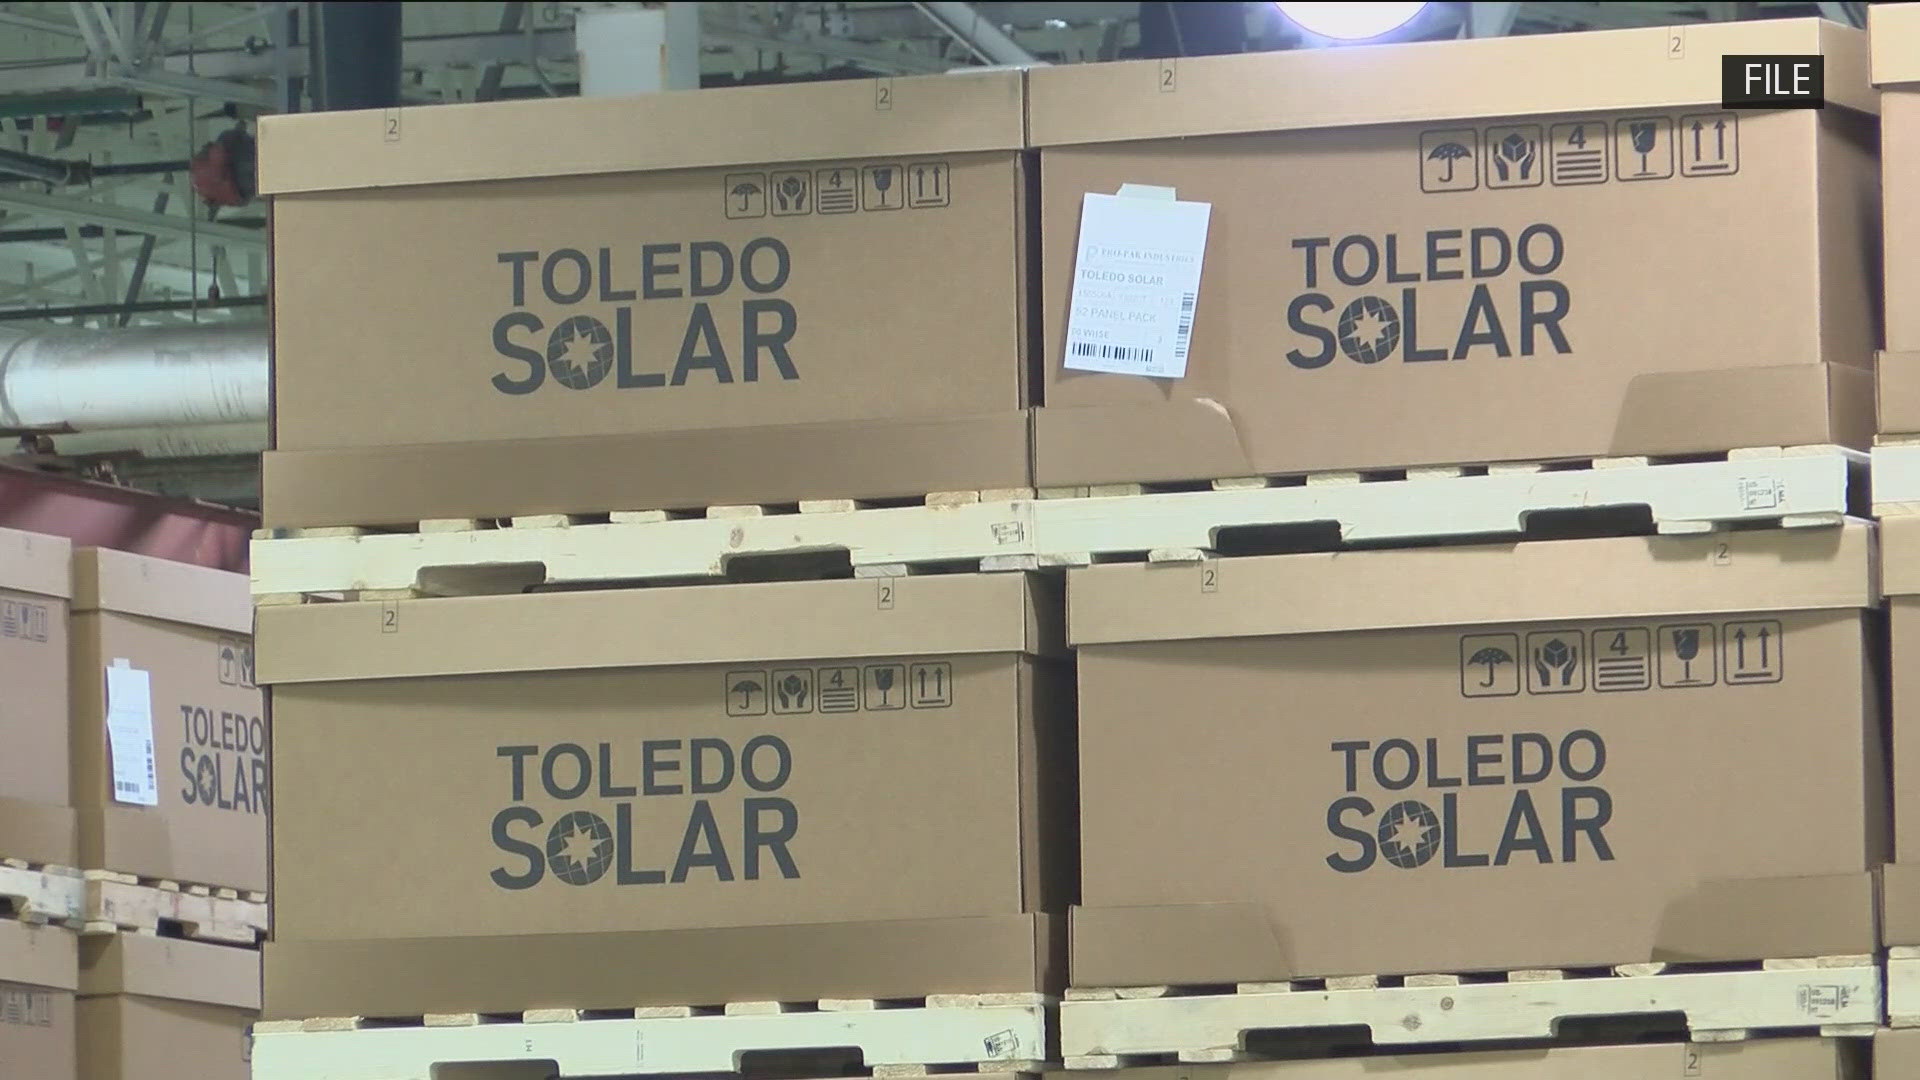 Perrysburg-based Toledo Solar is winding down operations to permanently close in August, but its interim president says it wasn't truly able to get off the ground.